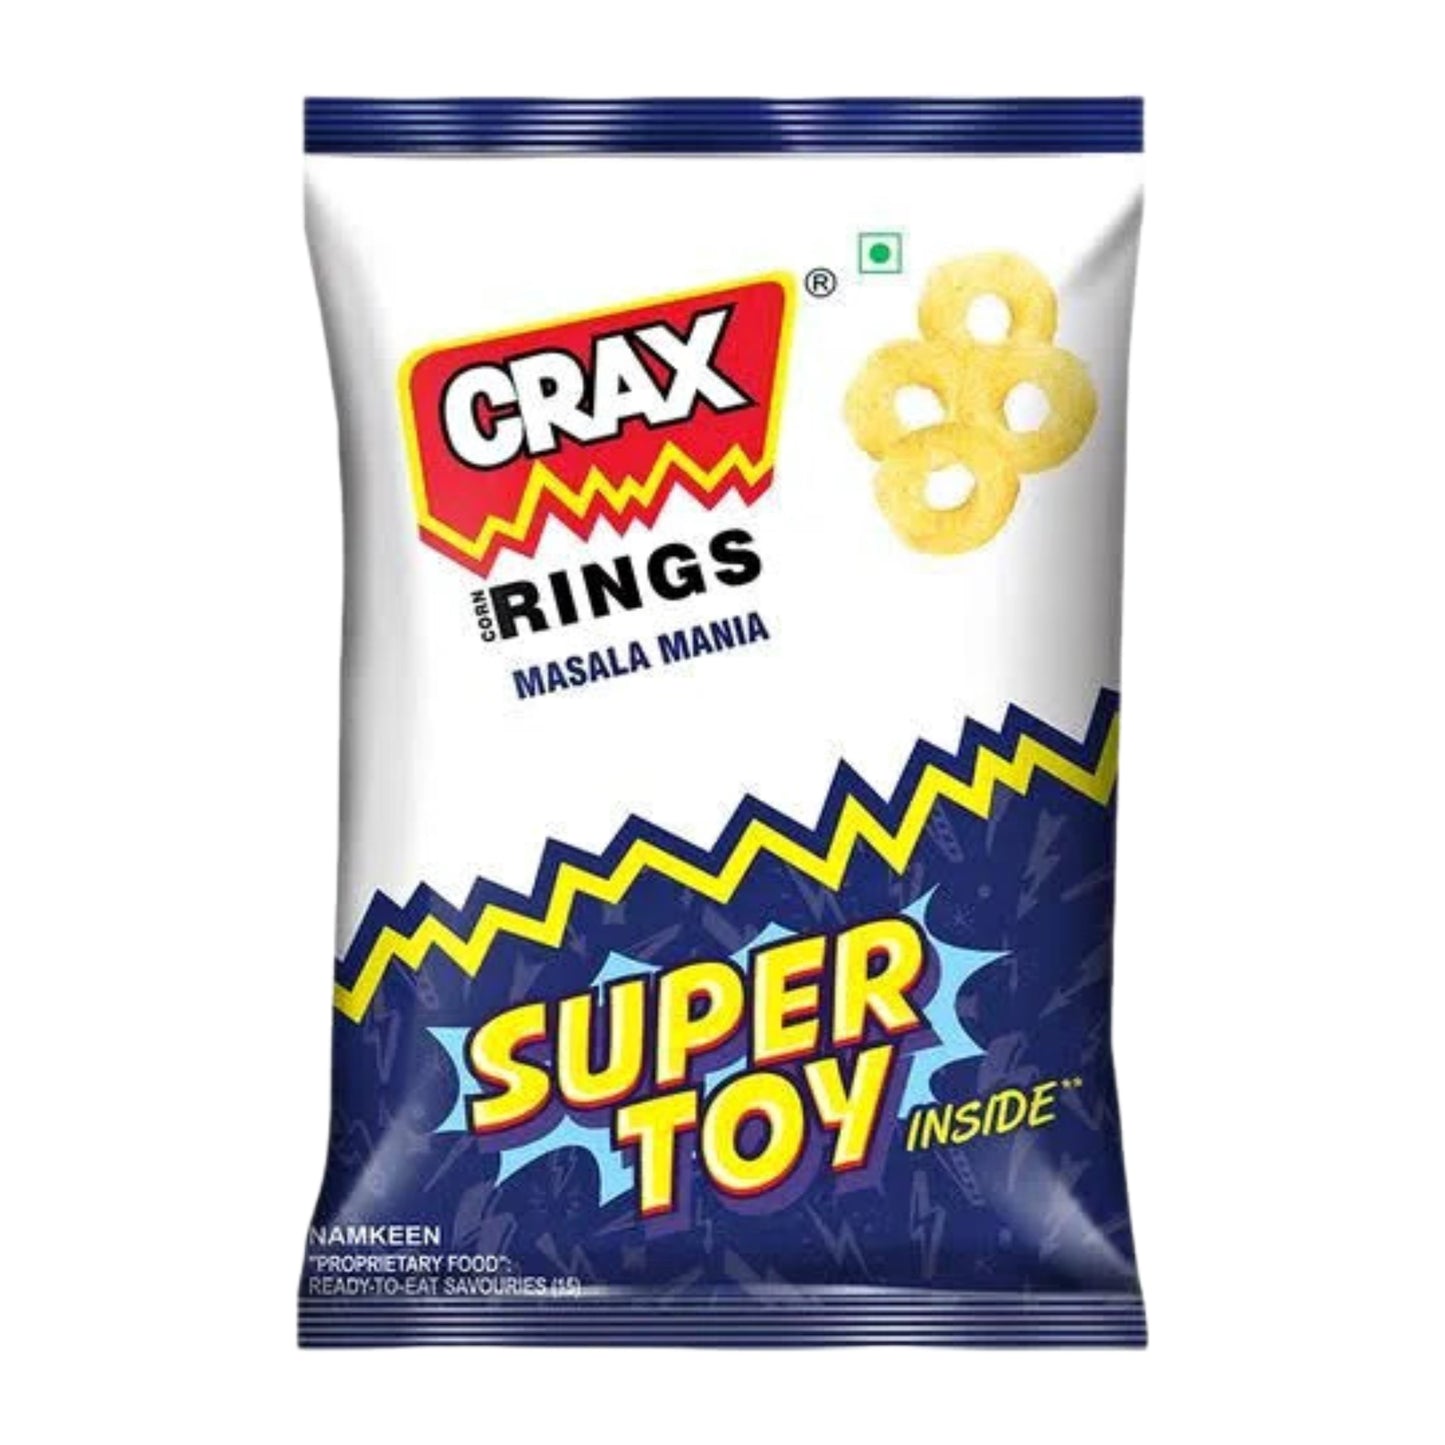 Crax Rings Masala Mania | Imported Indian Puff Rings